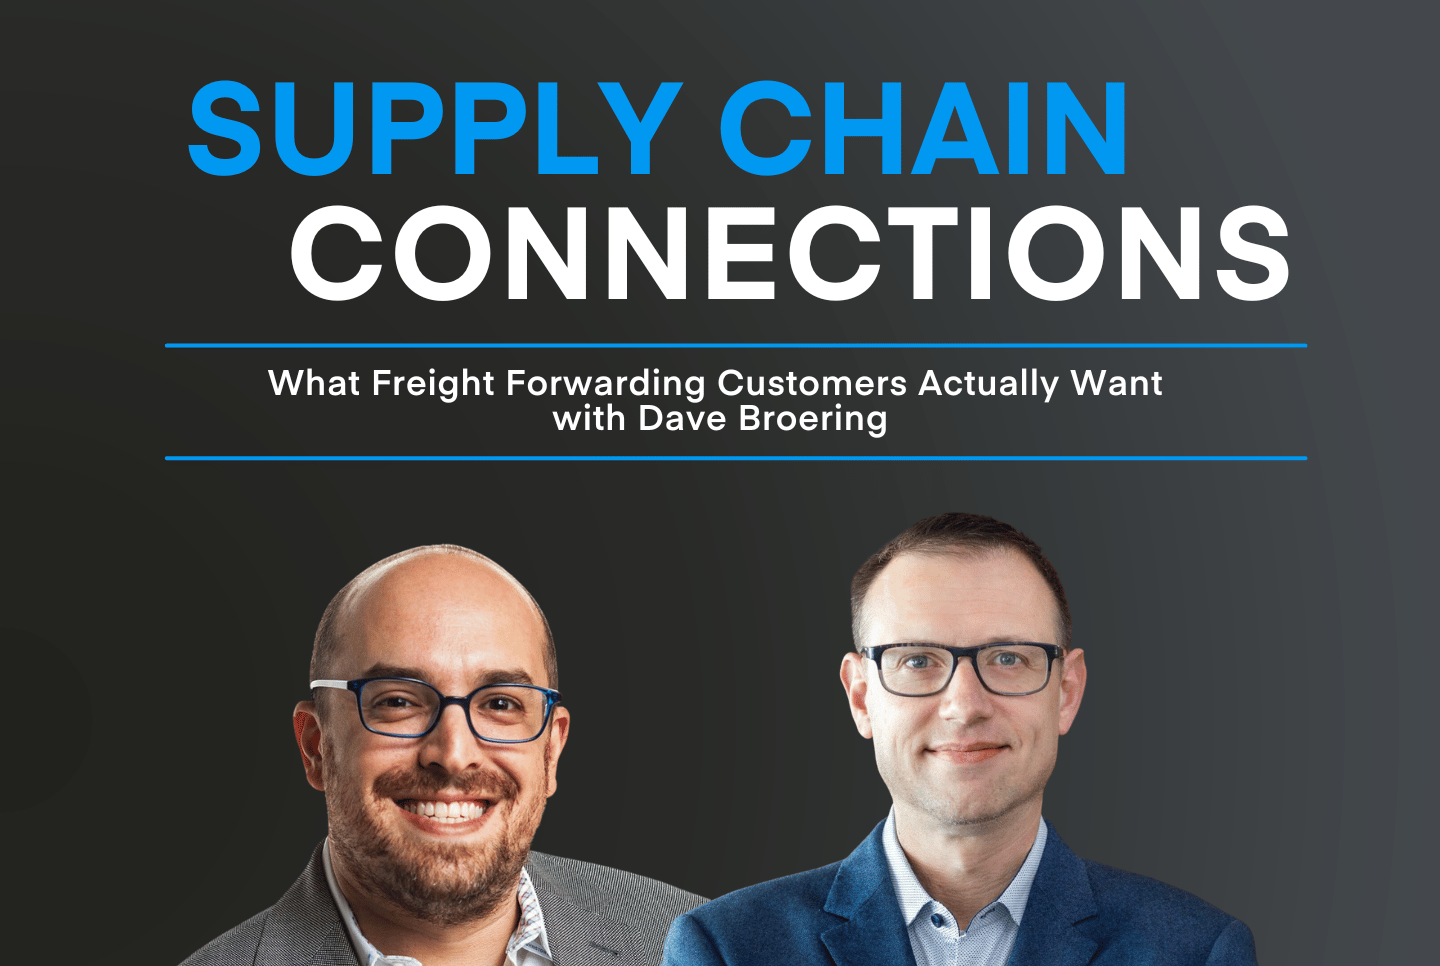 Dave Broering, NFI Logistics, Joins Chain.io's Brian Glick on Supply Chain Connections Podcast